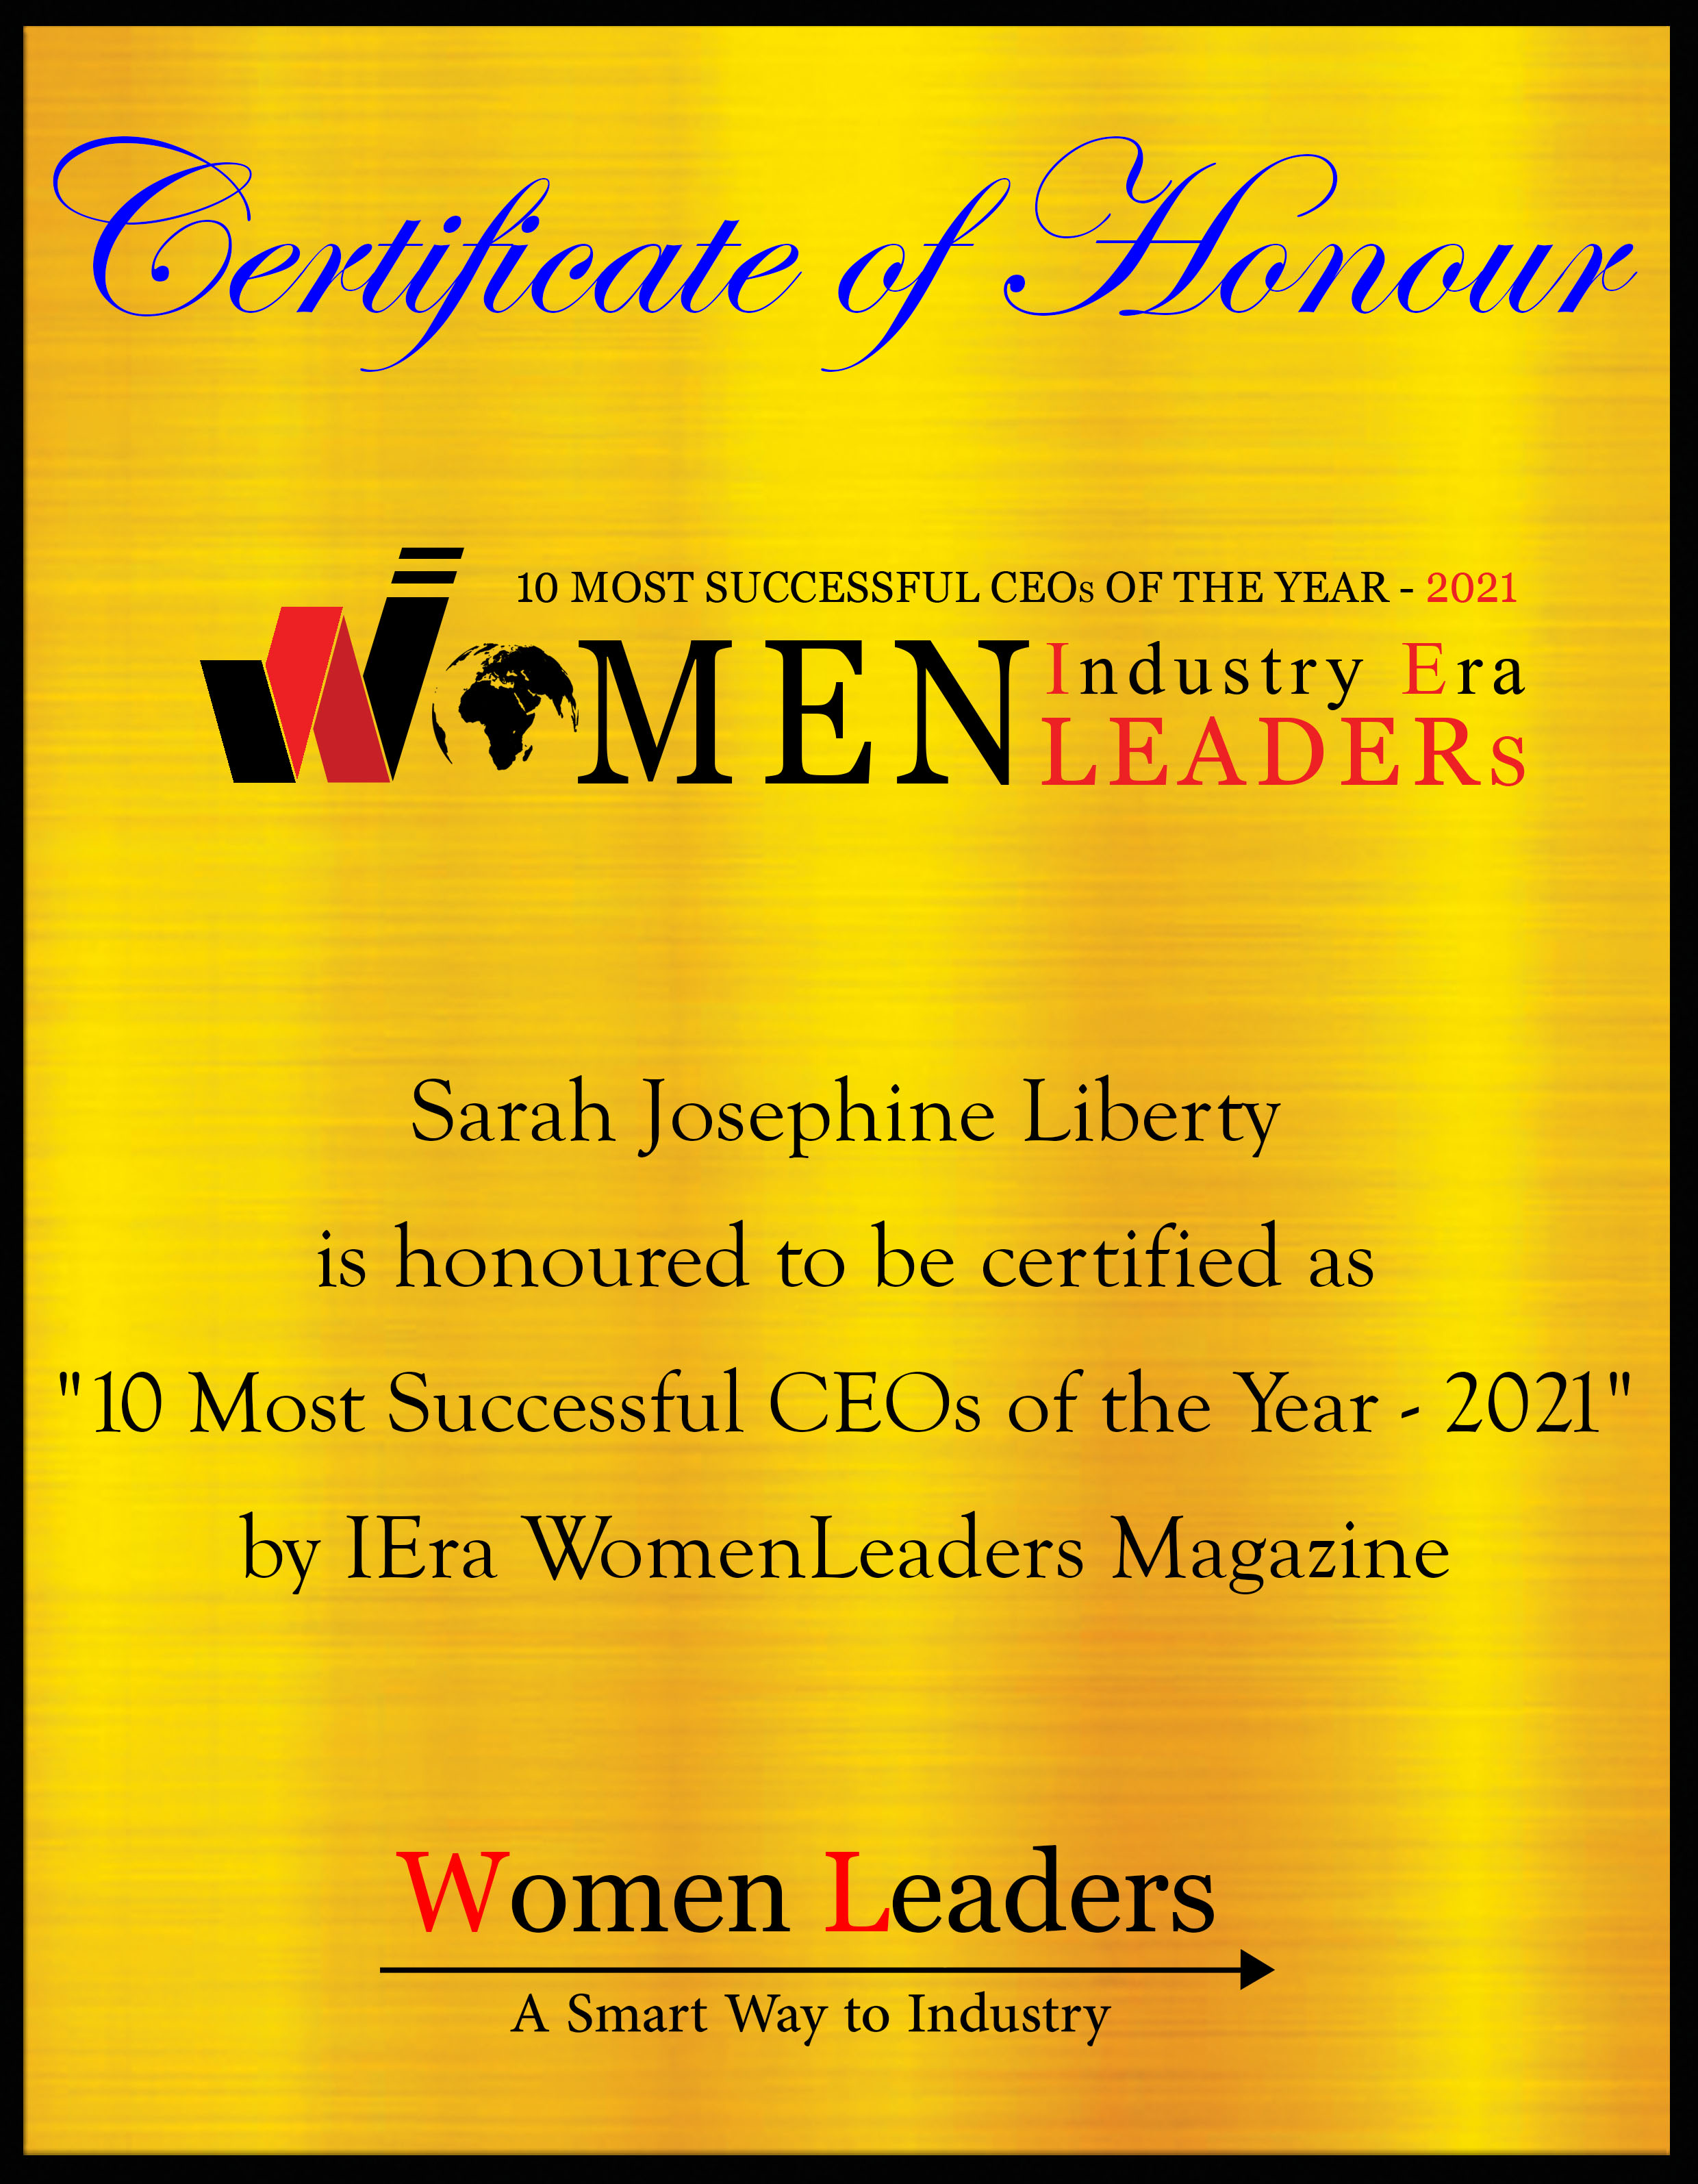 Sarah Josephine Liberty Founder & CEO of JustSociale, Most Successful CEOs of the Year - 2021